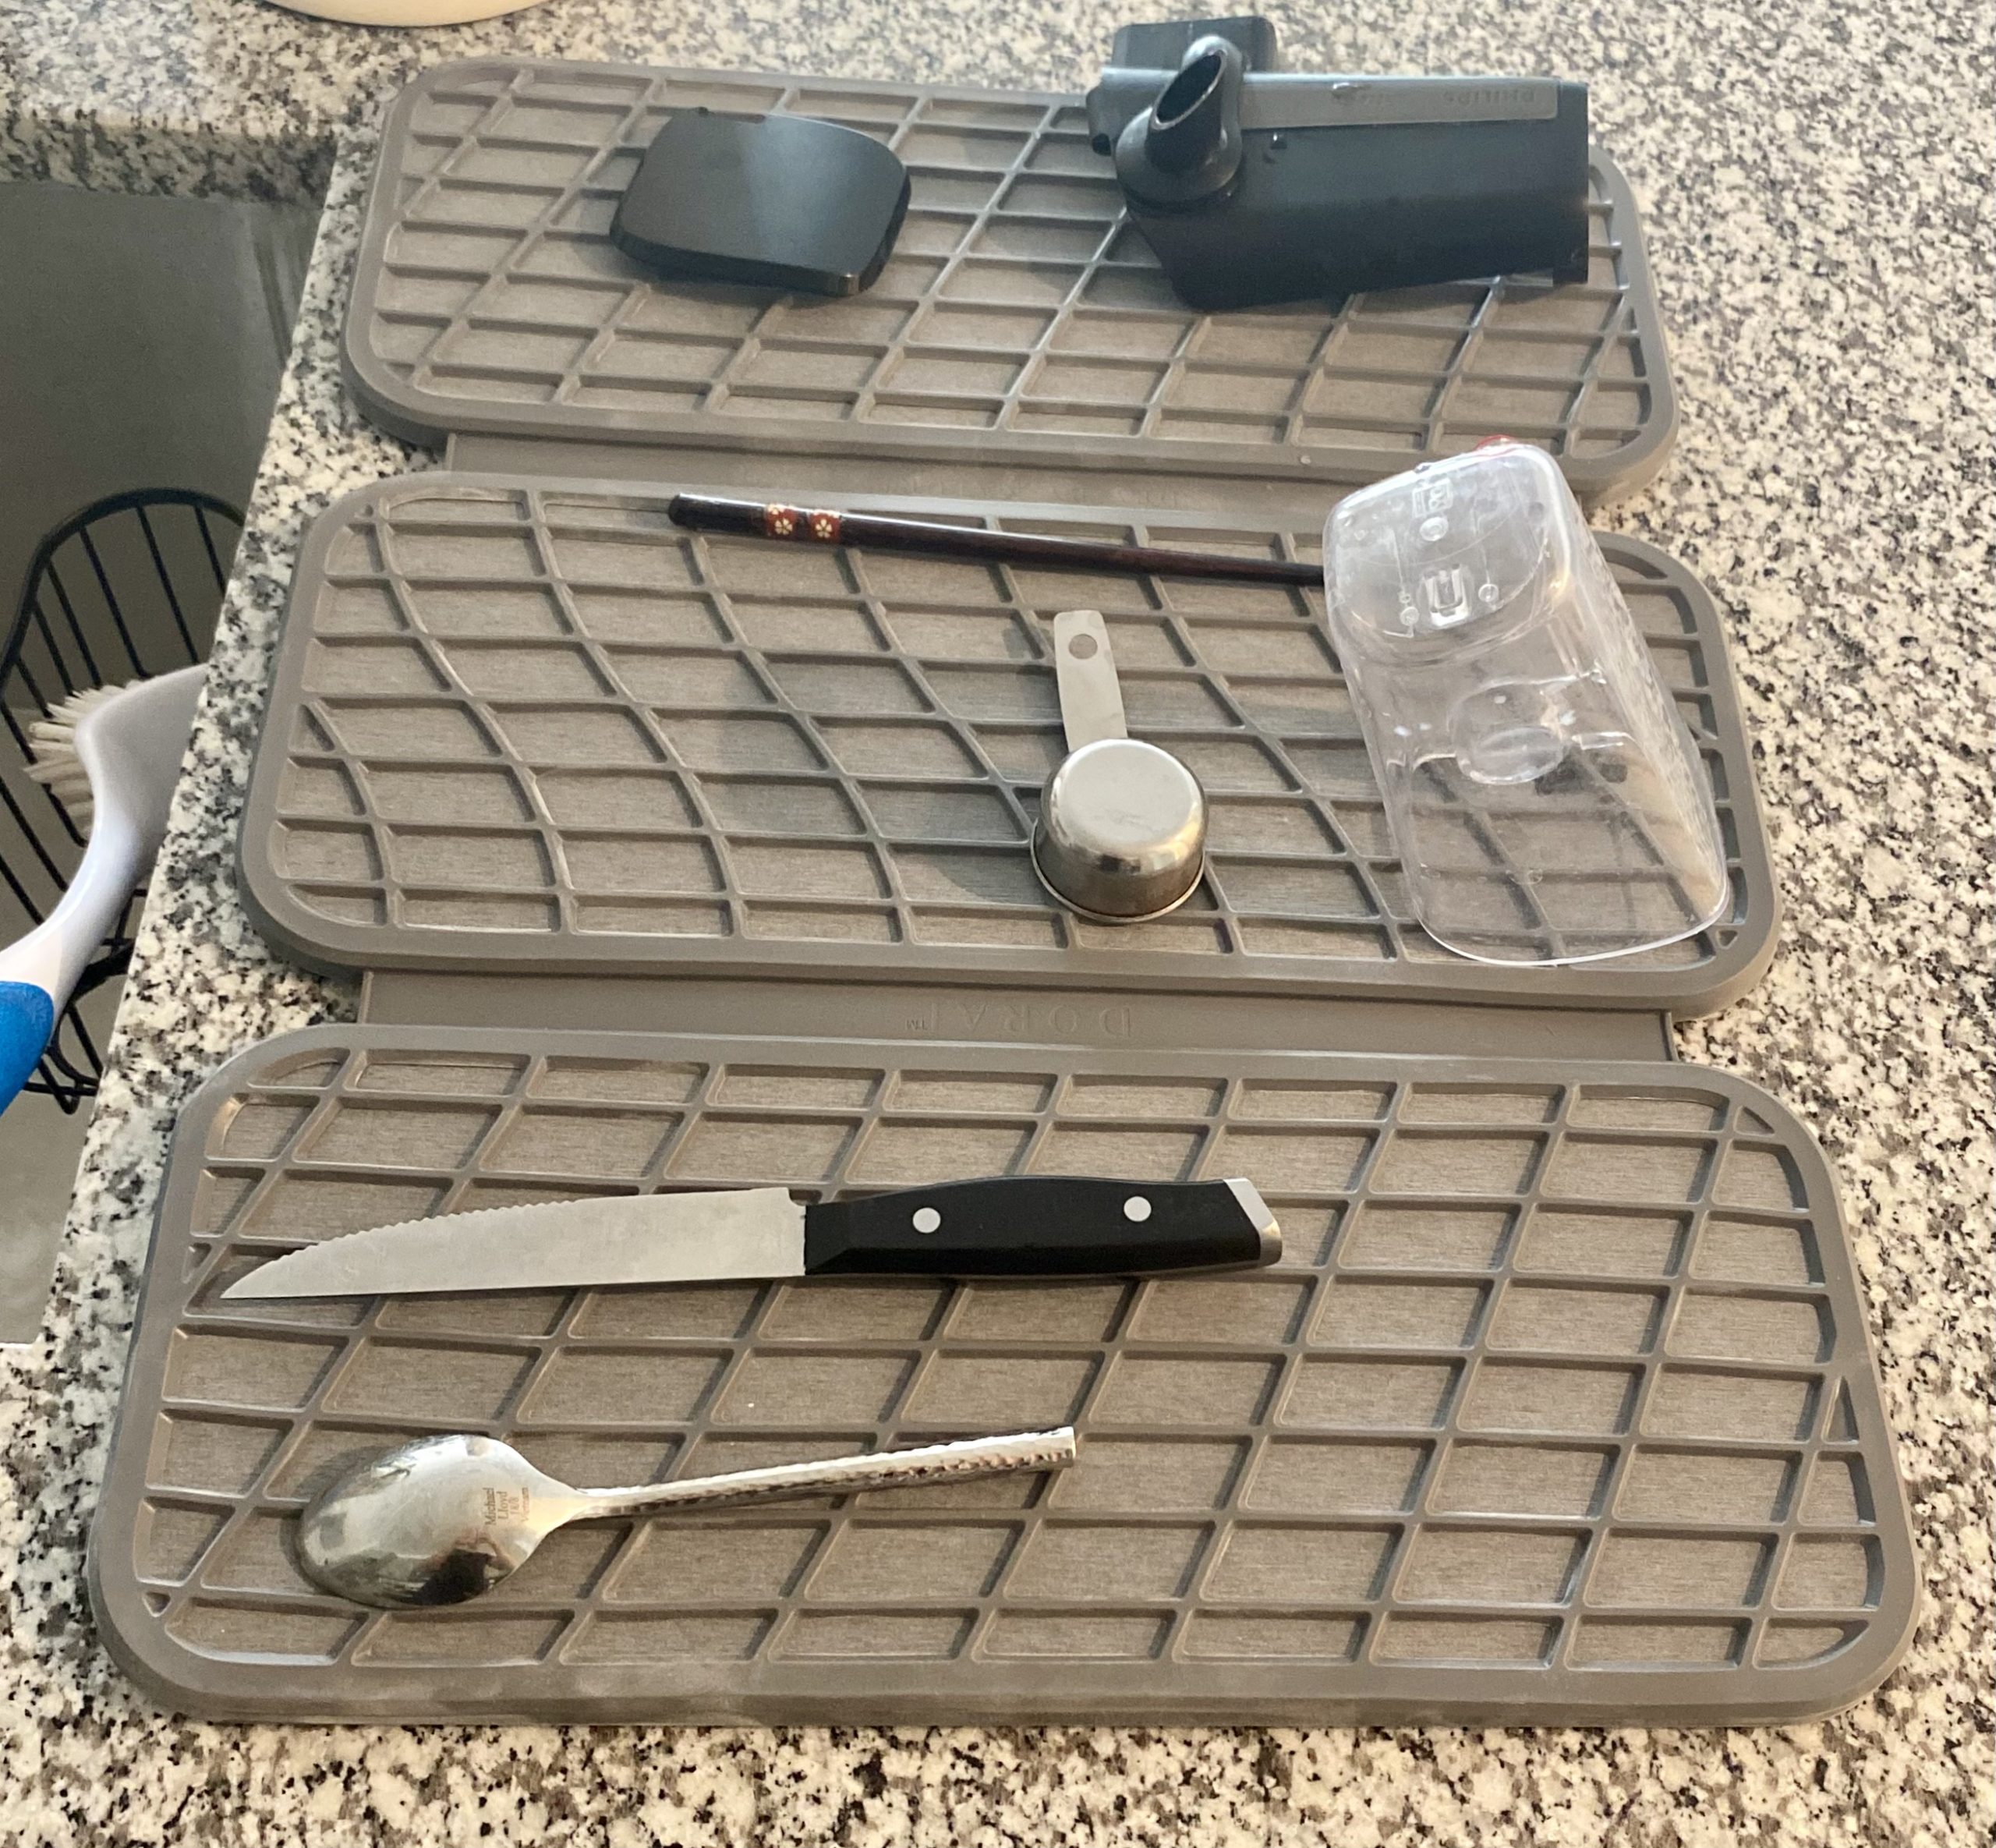 dorai dish drying mat with cutlery and kitchen utensils drying on it